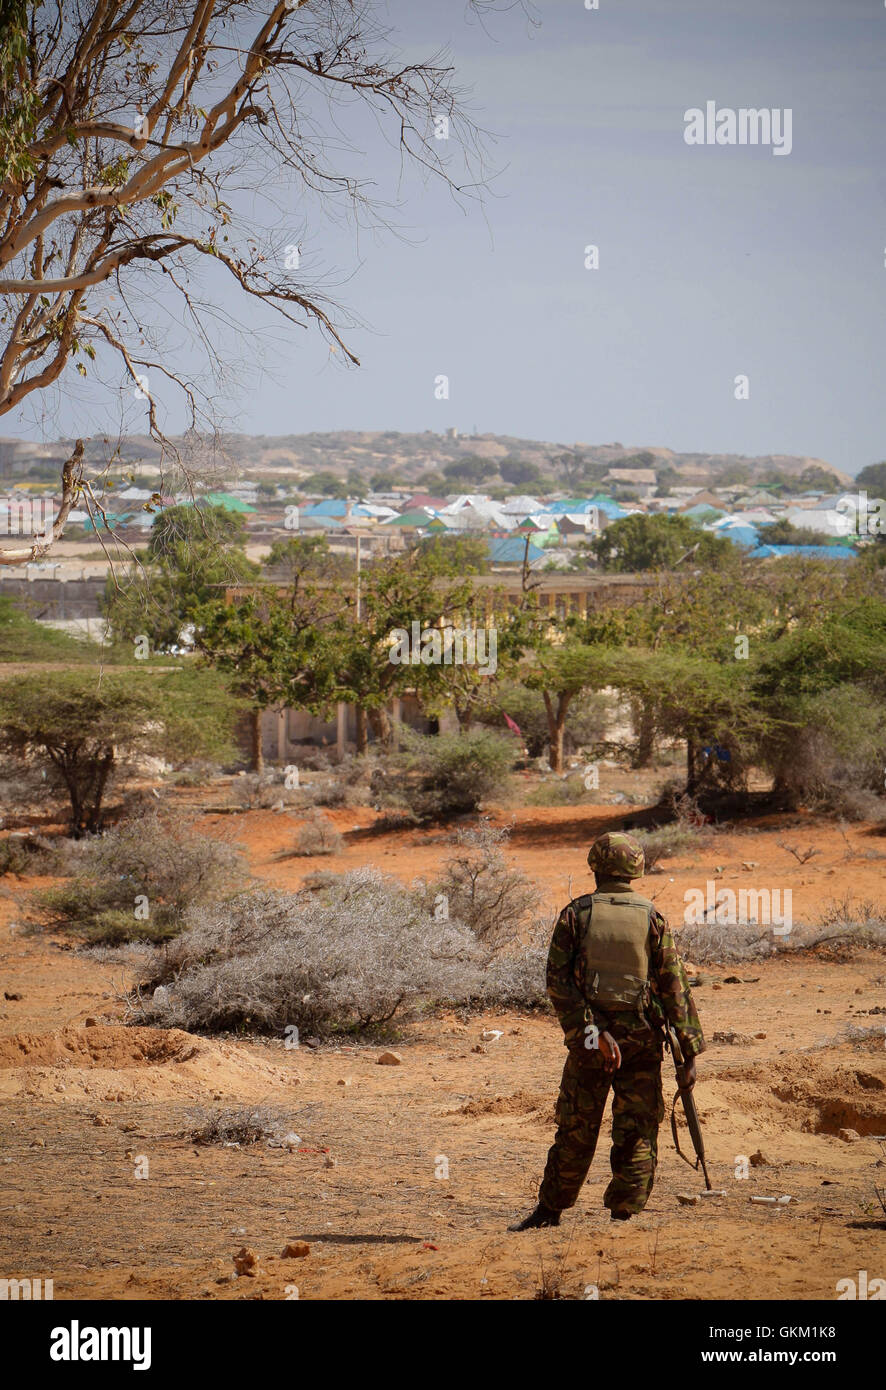 SOMALIA, Kismayo: In a handout photograph released by the African Union-United Nations Information Support Team 03 October, a soldier serving with the Kenyan Contingent of the African Union Mission in Somalia (AMISOM) looks out of the southern Somali port city of Kismayo, during a security sweep of a former police station by a team of AMISOM engineers for improvised explosive devices (IEDs). The Al-Qaeda-affiliated extremist group Al Shabaab withdrew from the city on 02 October after AMISOM troops, Somali National Army (SNA) forces and the pro-government Ras Kimboni Brigade militia entered and Stock Photo